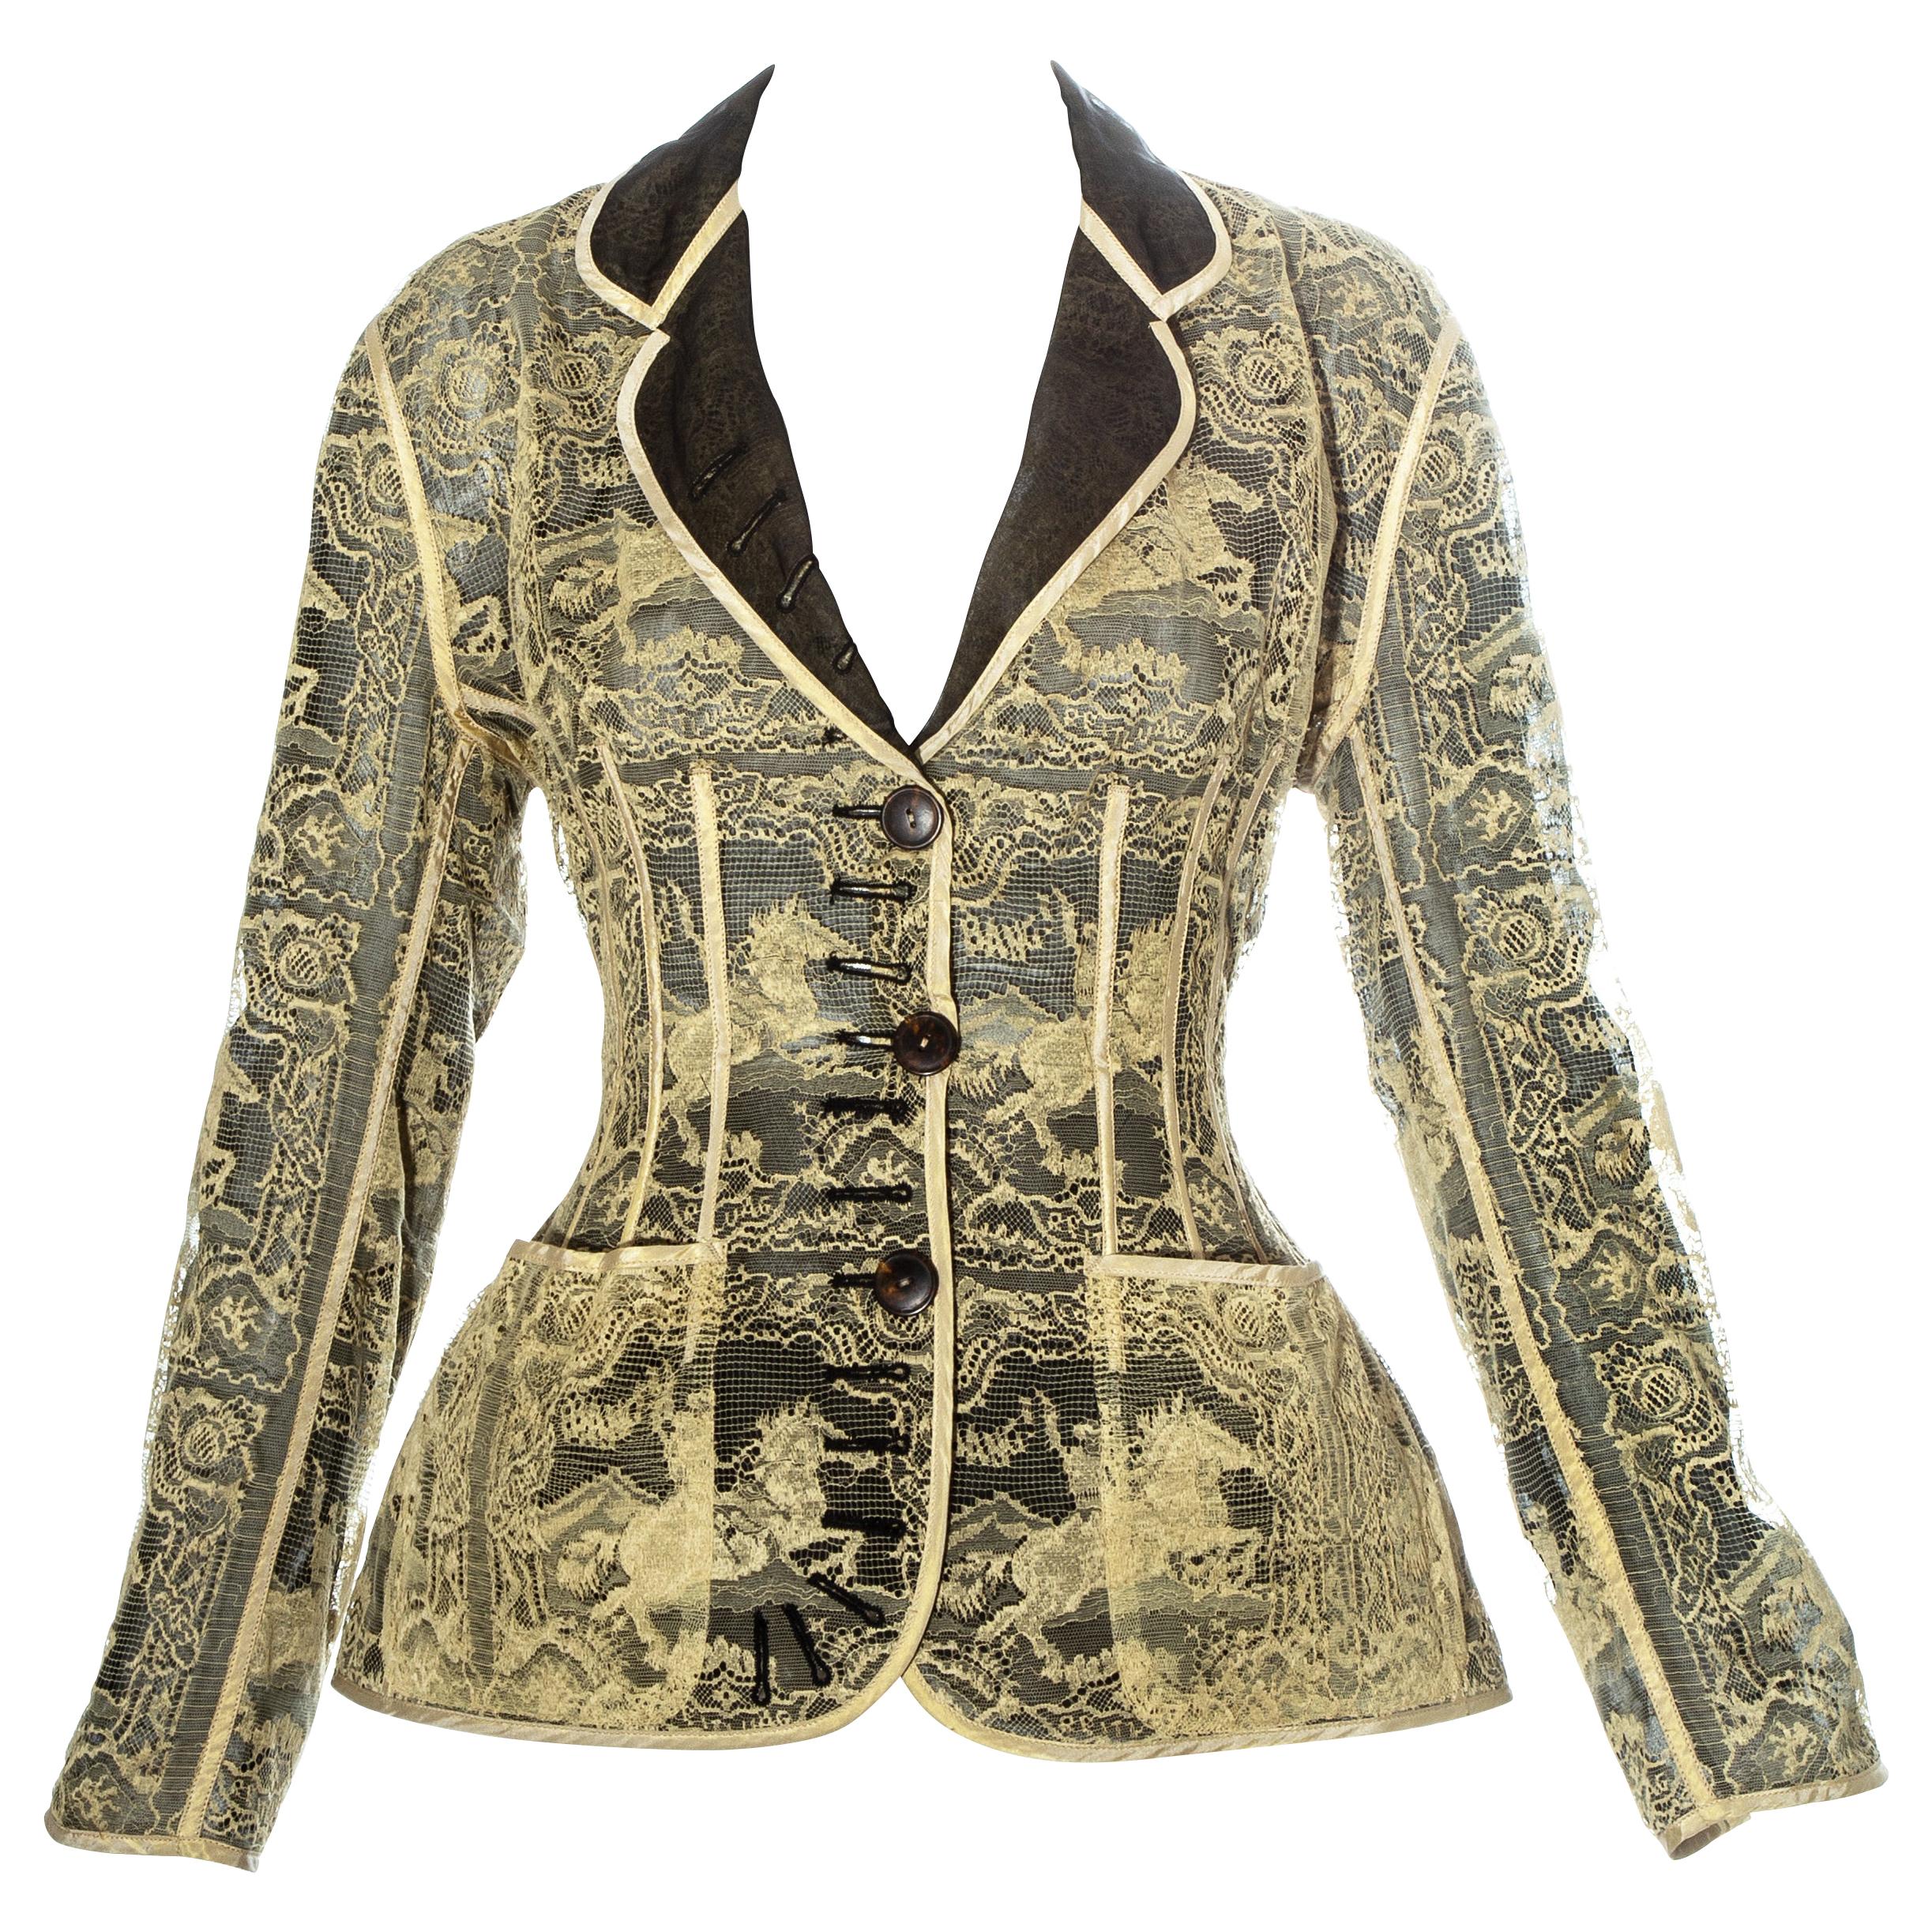 Jean Paul Gaultier gold lace and silk organza corseted jacket, ss 1988